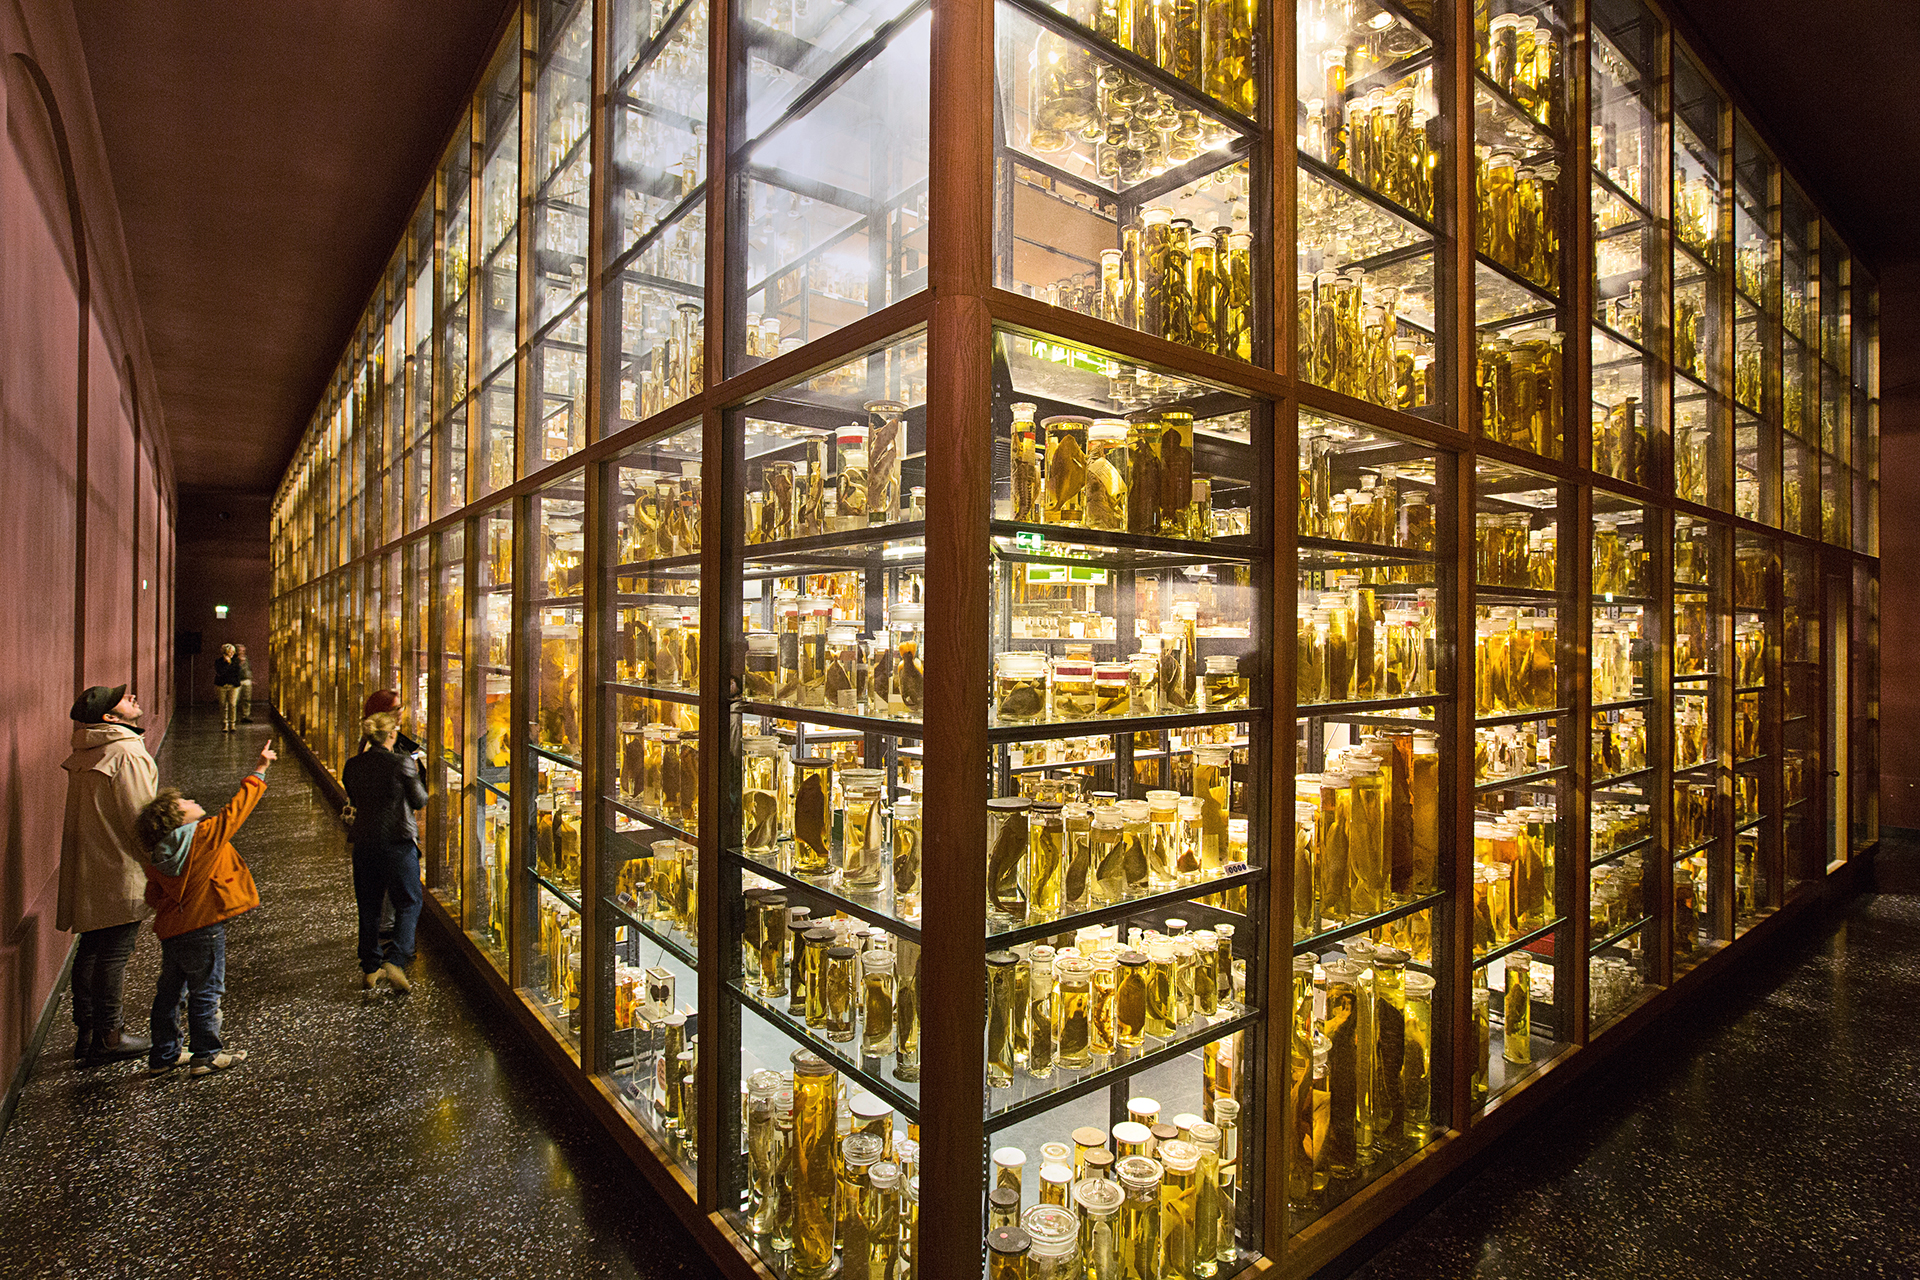  The “wet collection” is one of the most spectacular sections in the museum. More than 270,000 animal specimens are preserved in 80,000 liters of alcohol.  Berlin, Germany.  